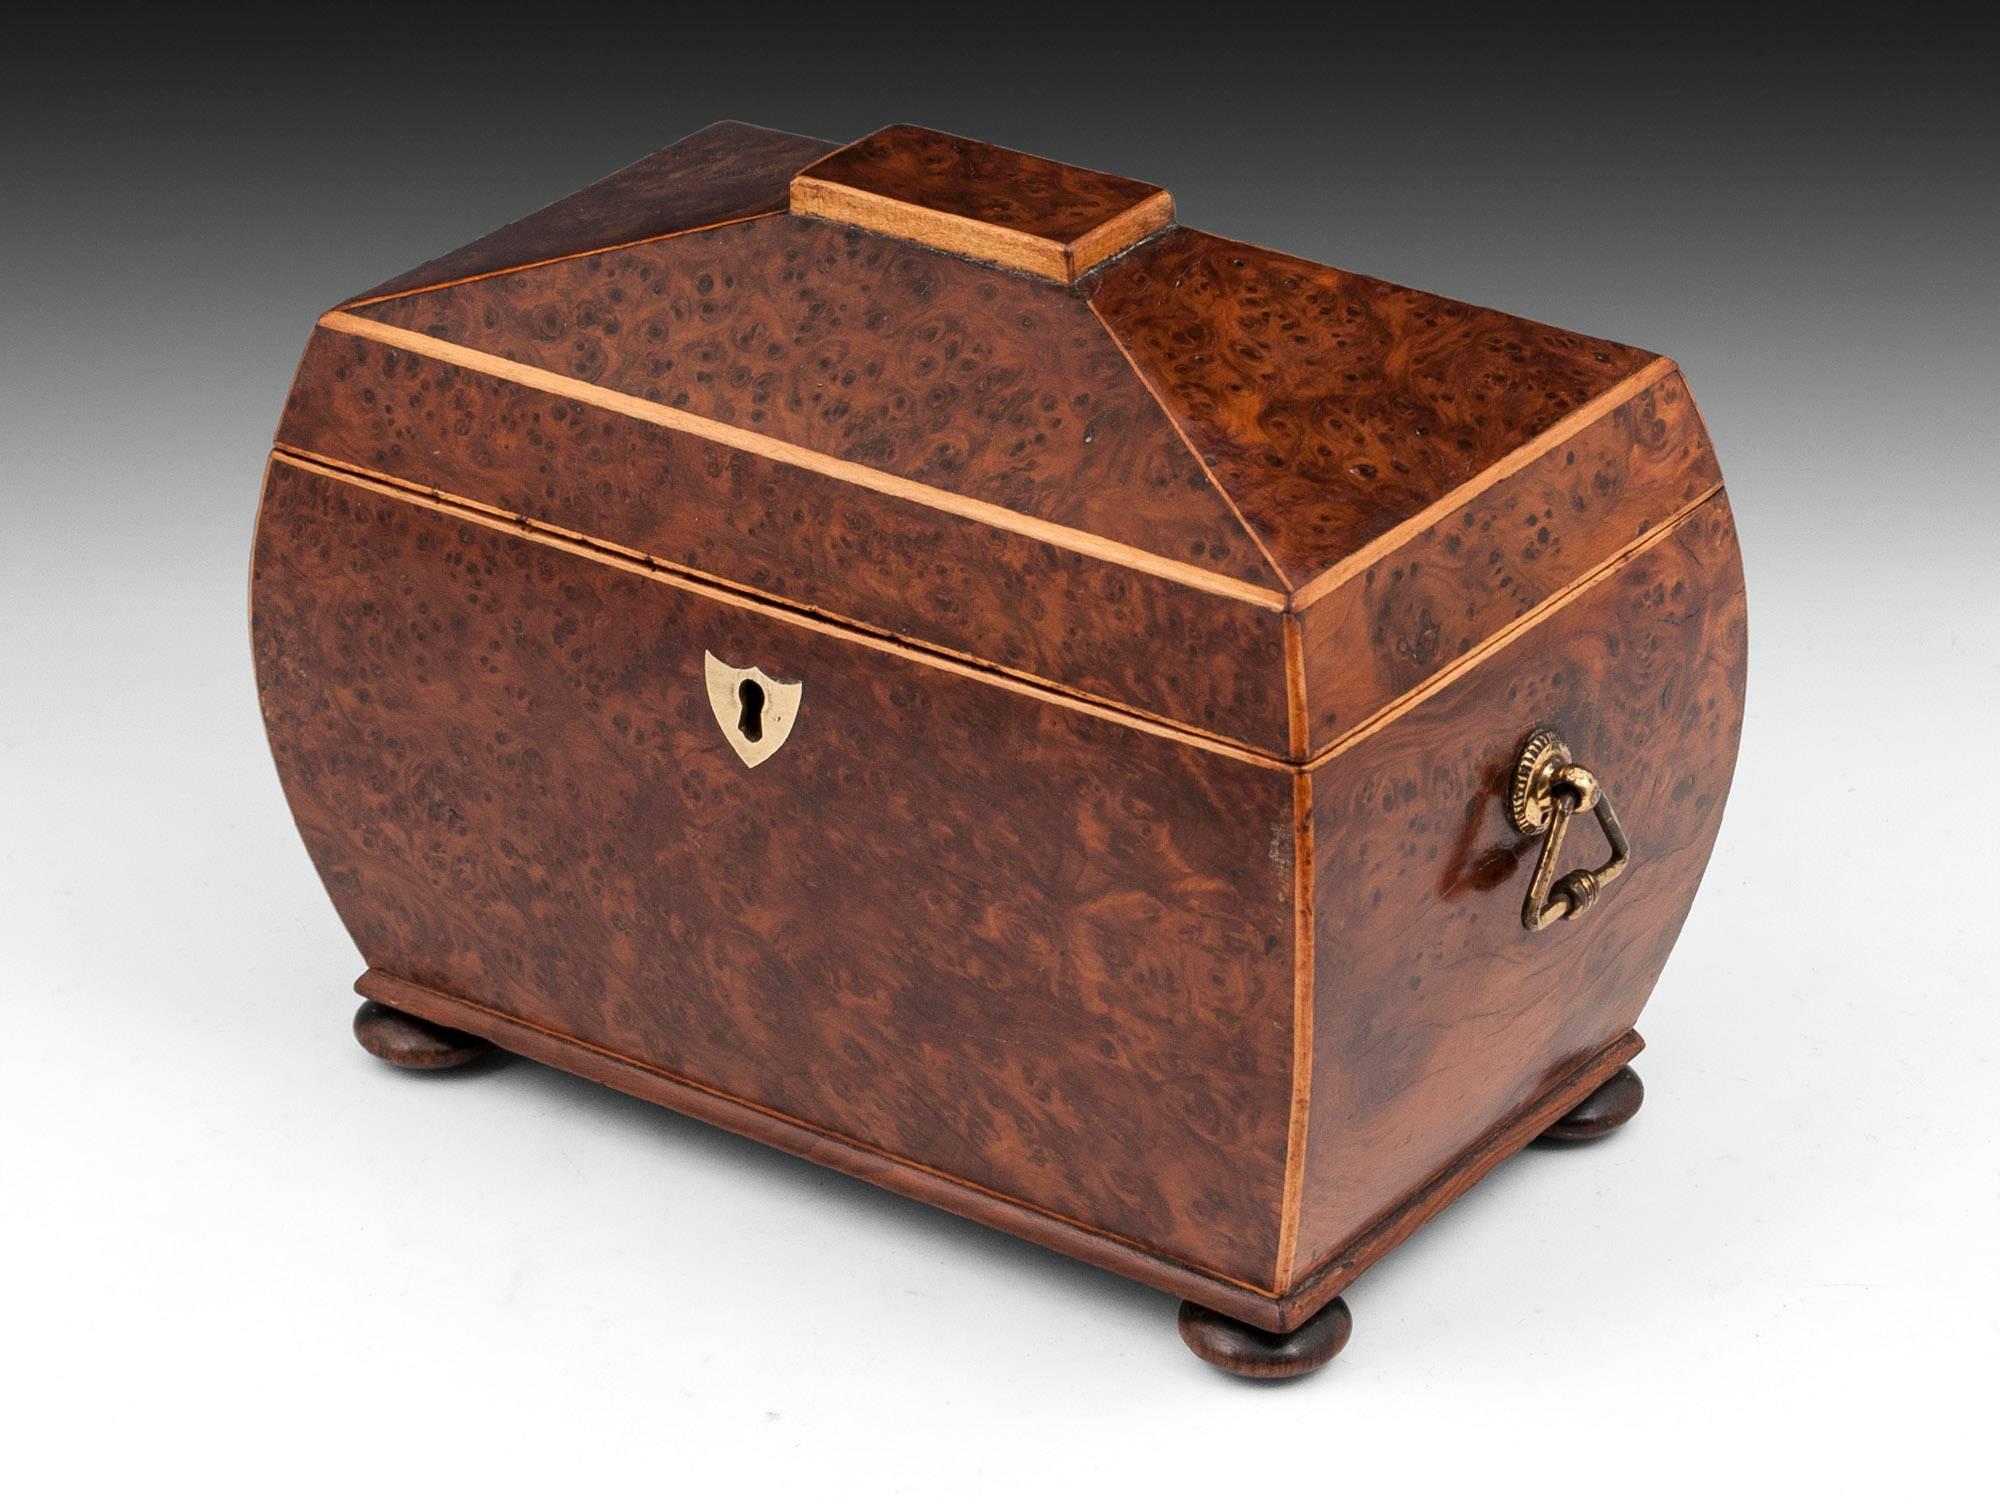 British Antique Regency Bombe Shaped Burr Yew Tea Caddy For Sale